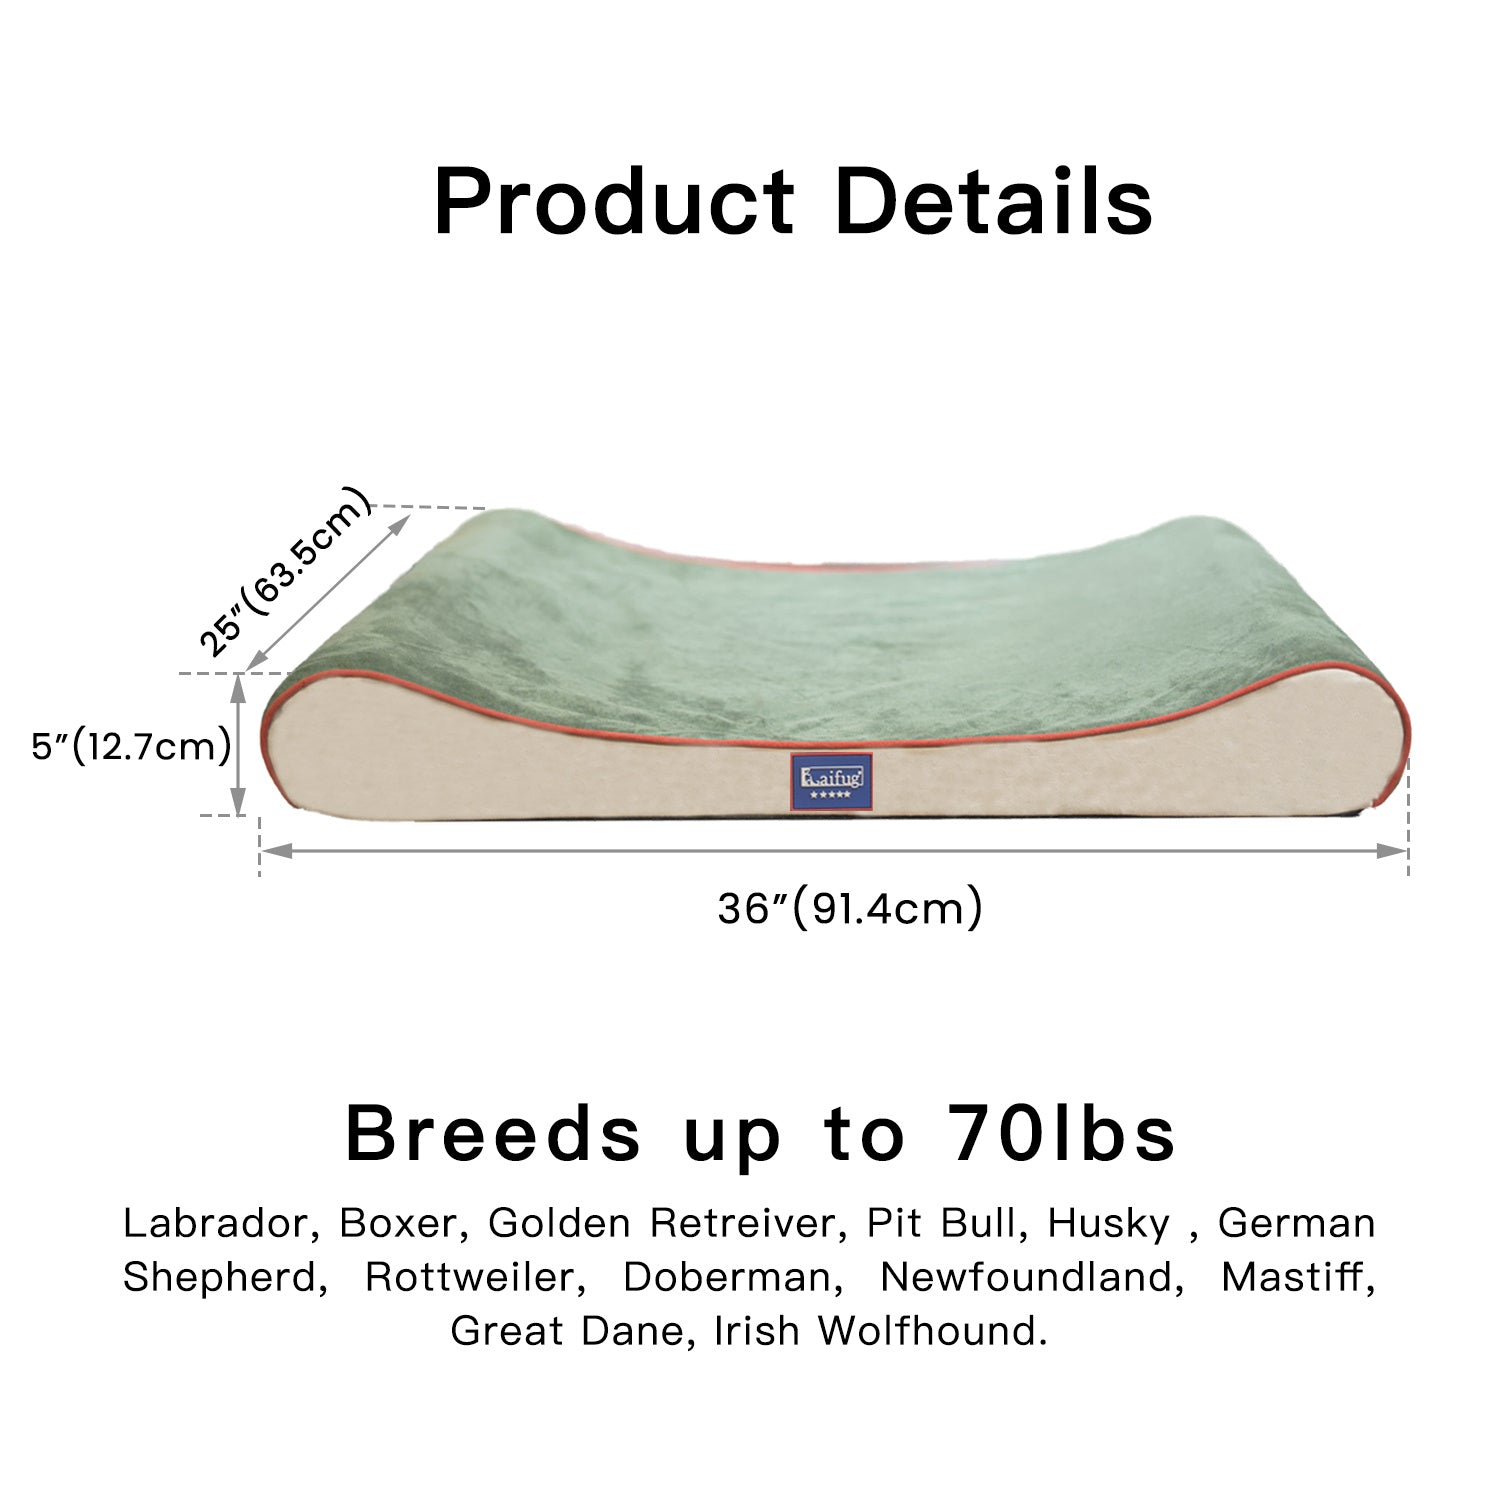 Orthopedic Foam Mattress Dog Bed Contour Bed with Removable Washable Cover and Waterproof Liner Nonskid Bottom - Friendly Design Ideal for Crate or Kennel